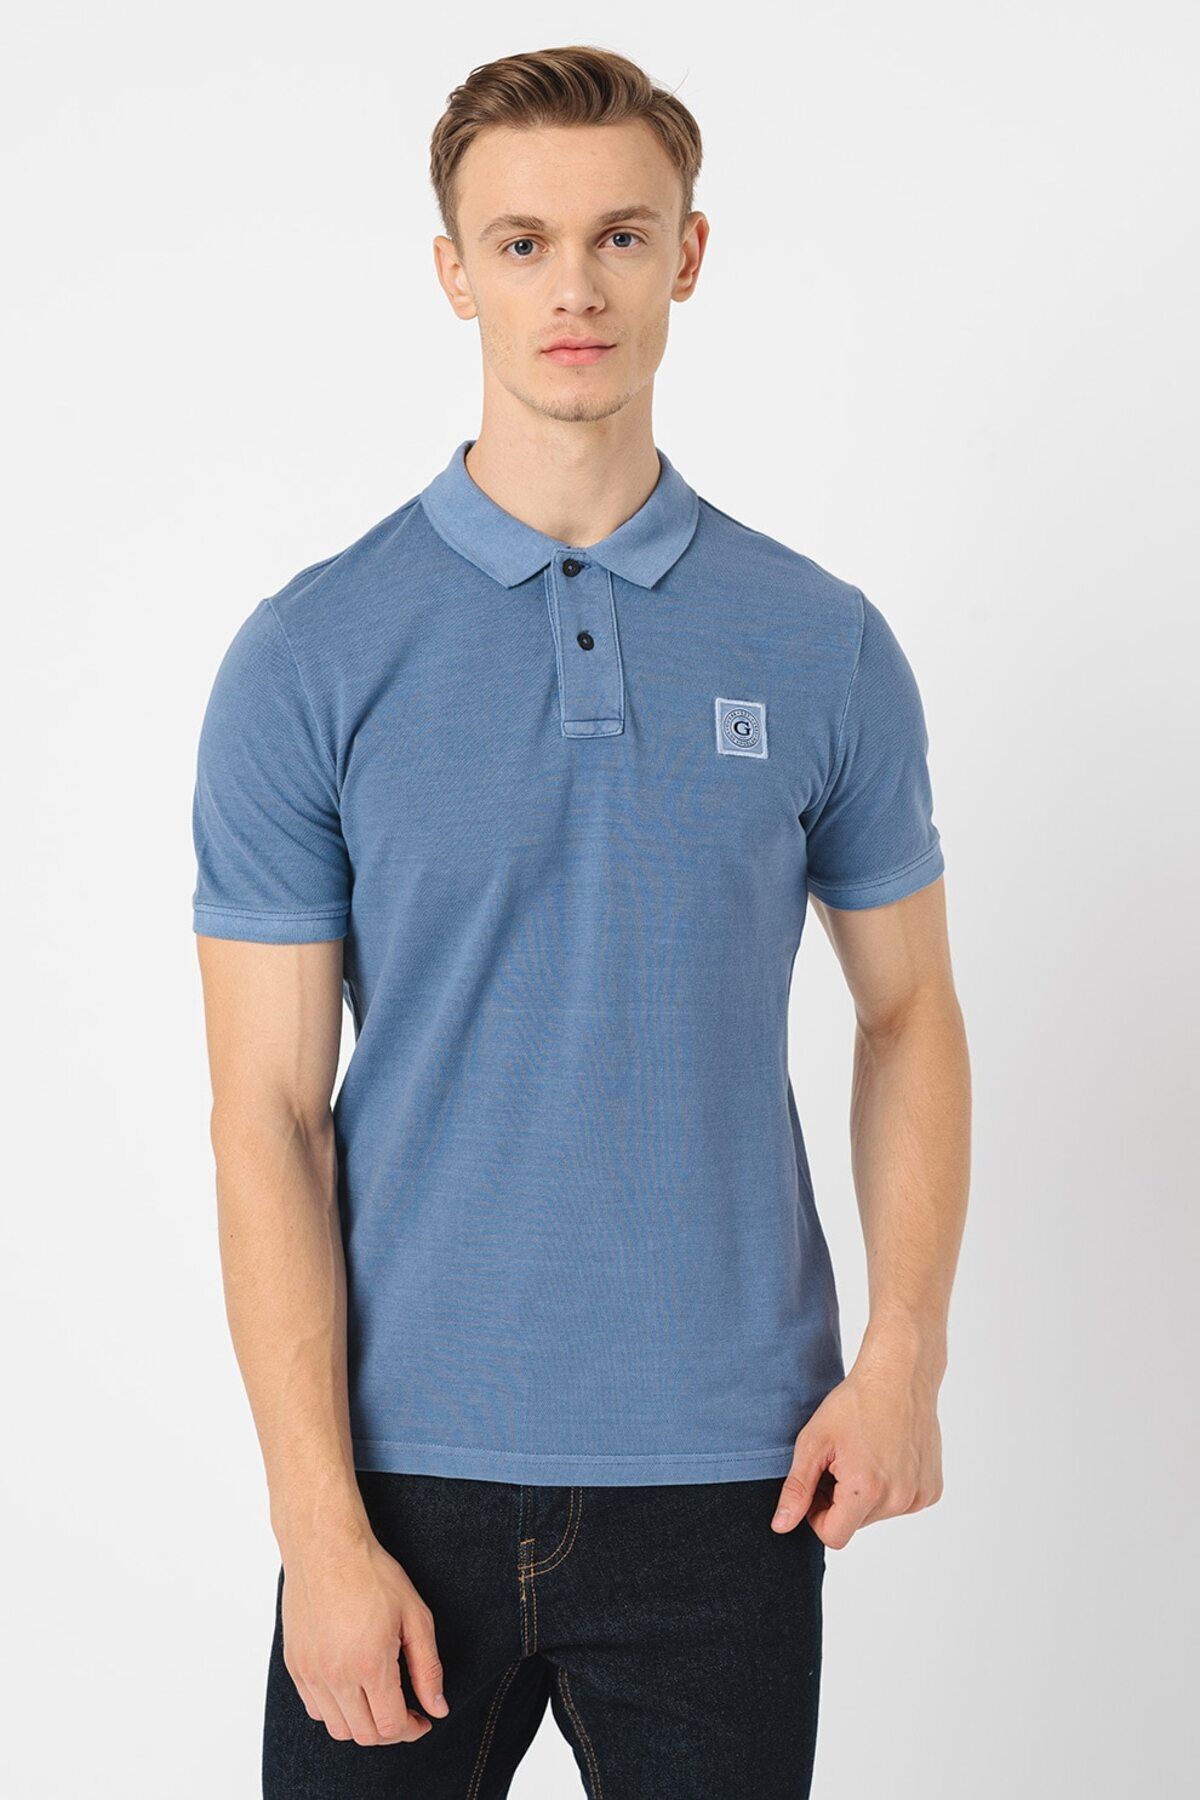 Guess Washed Erkek Slim Fit Polo T-Shirt